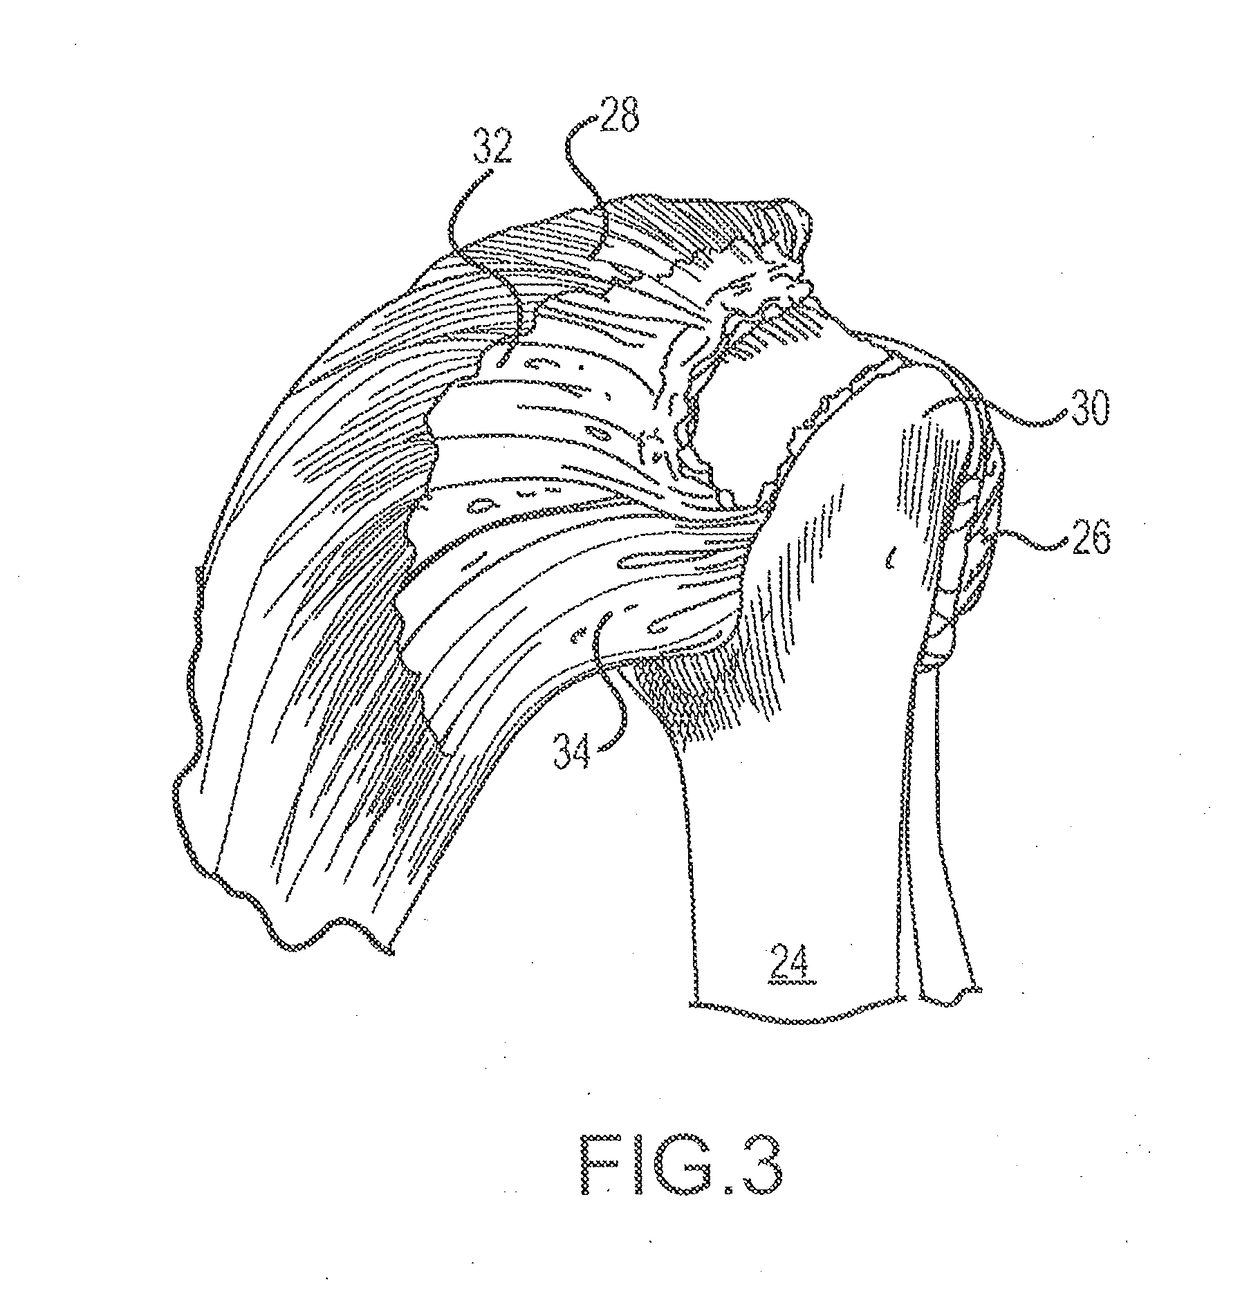 Suture sleeve patch and methods of delivery within an existing arthroscopic workflow